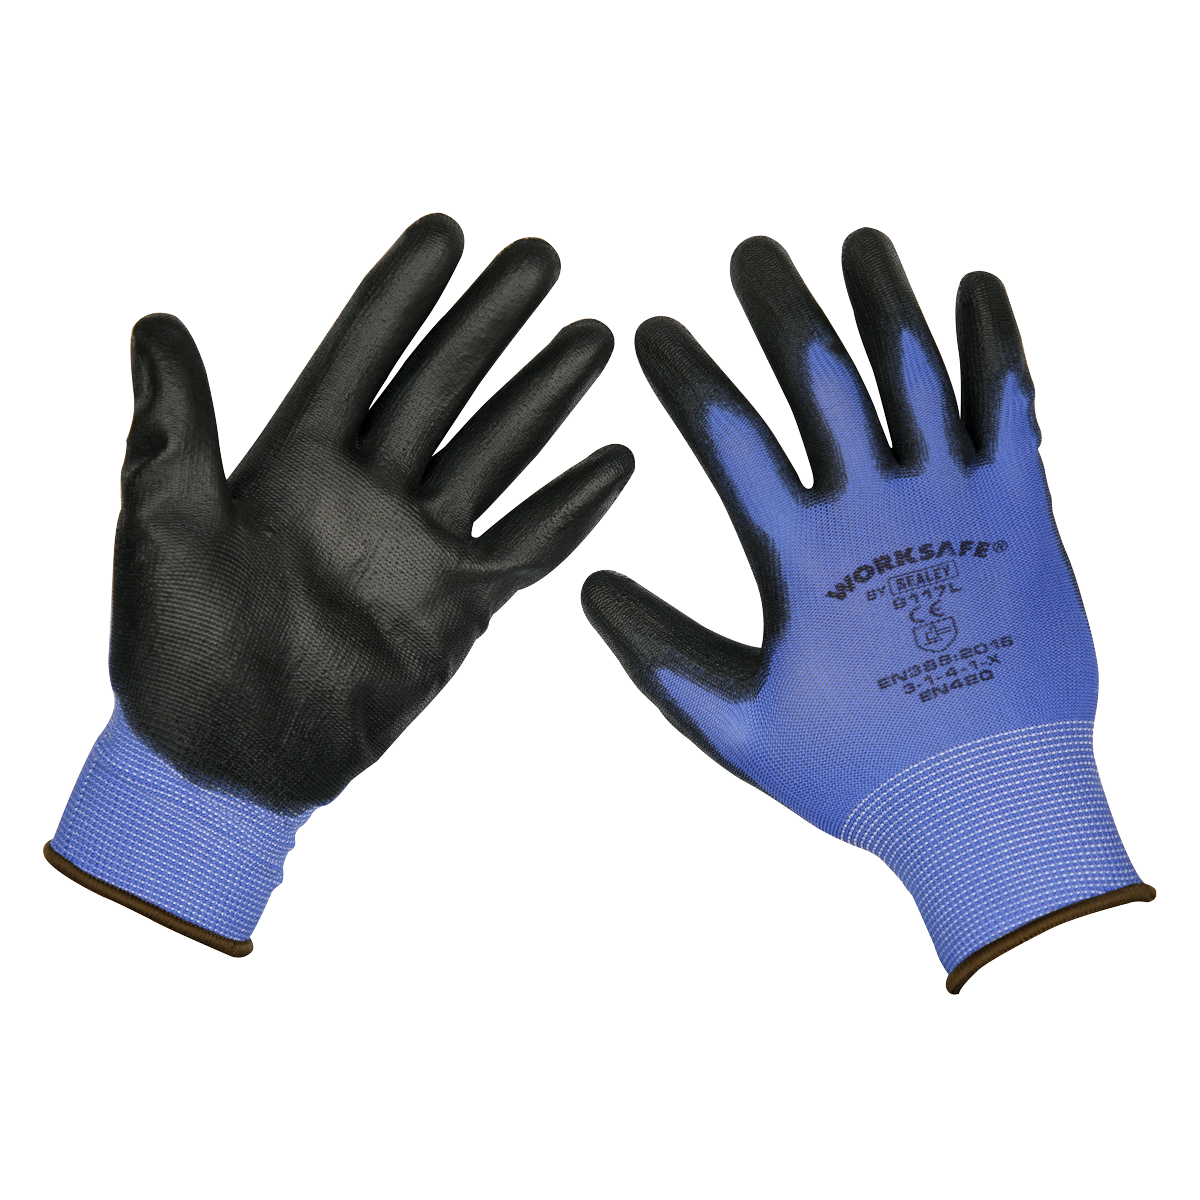 Lightweight Precision Grip Gloves (Large) - Pack of 6 Pairs - TSP117L/6 - Farming Parts